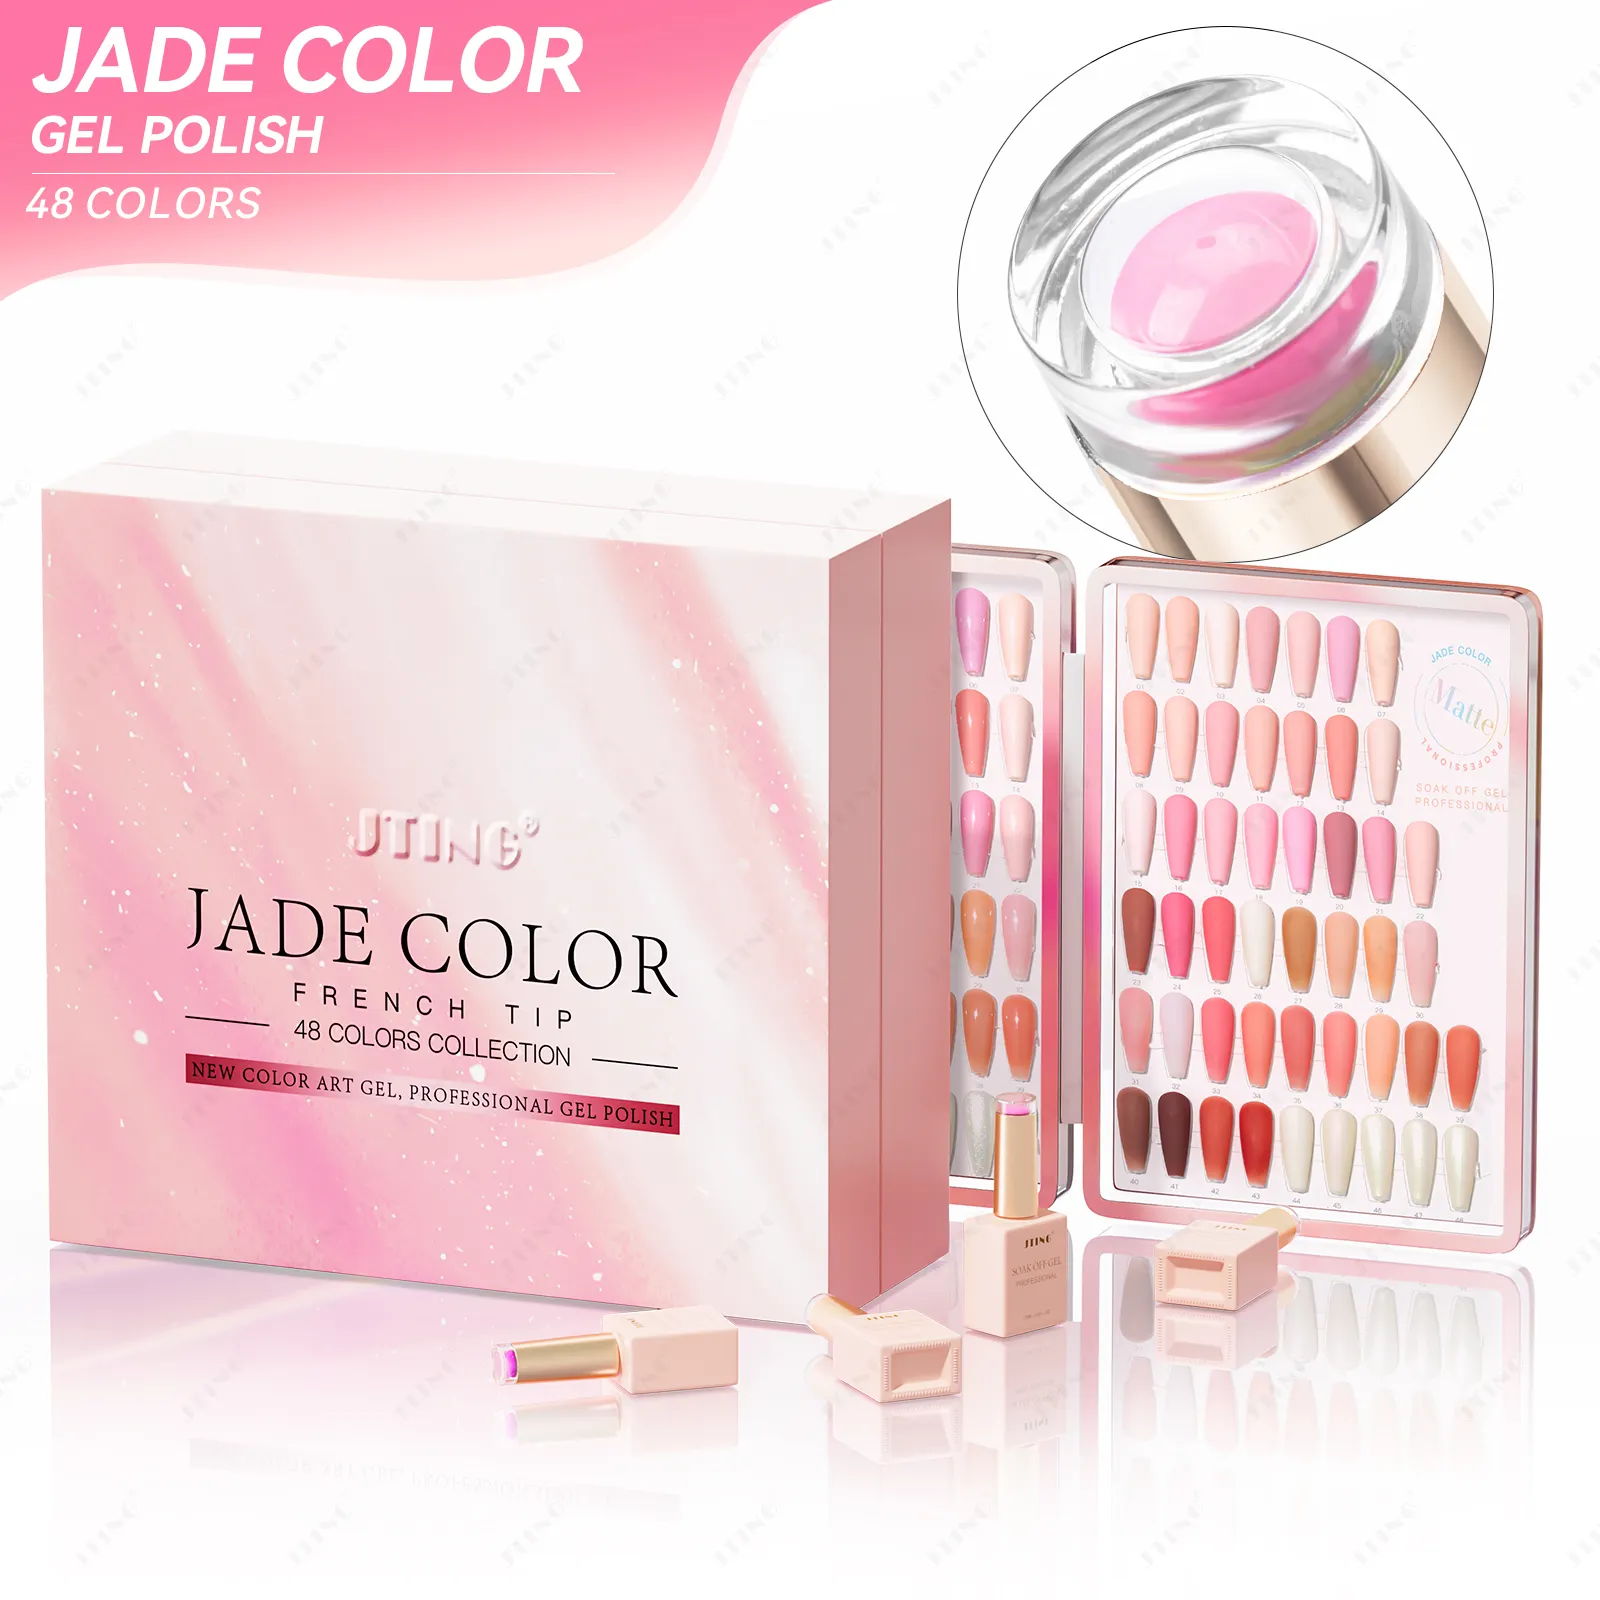 JTING Hot popular French Nail Jade 48color pink collection gel nail polish free color book box OEM unique private brand logo